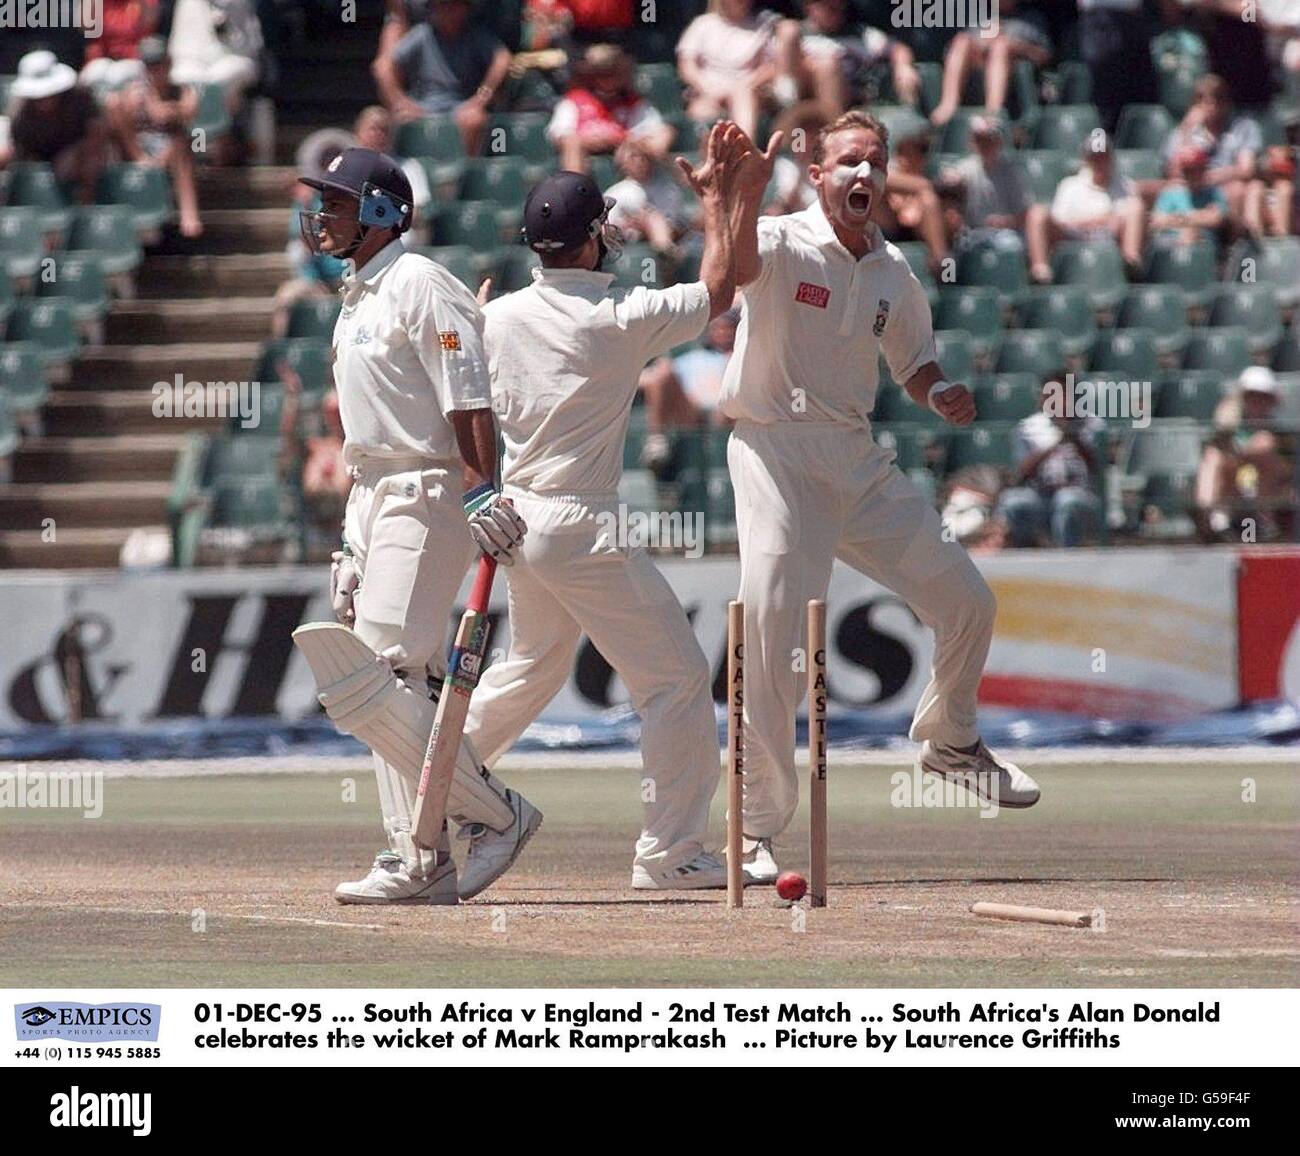 01-DEC-95, South Africa v England - 2nd Test Match, South Africa's Allan Donald celebrates the wicket of Mark Ramprakash, Picture by Laurence Griffiths Stock Photo